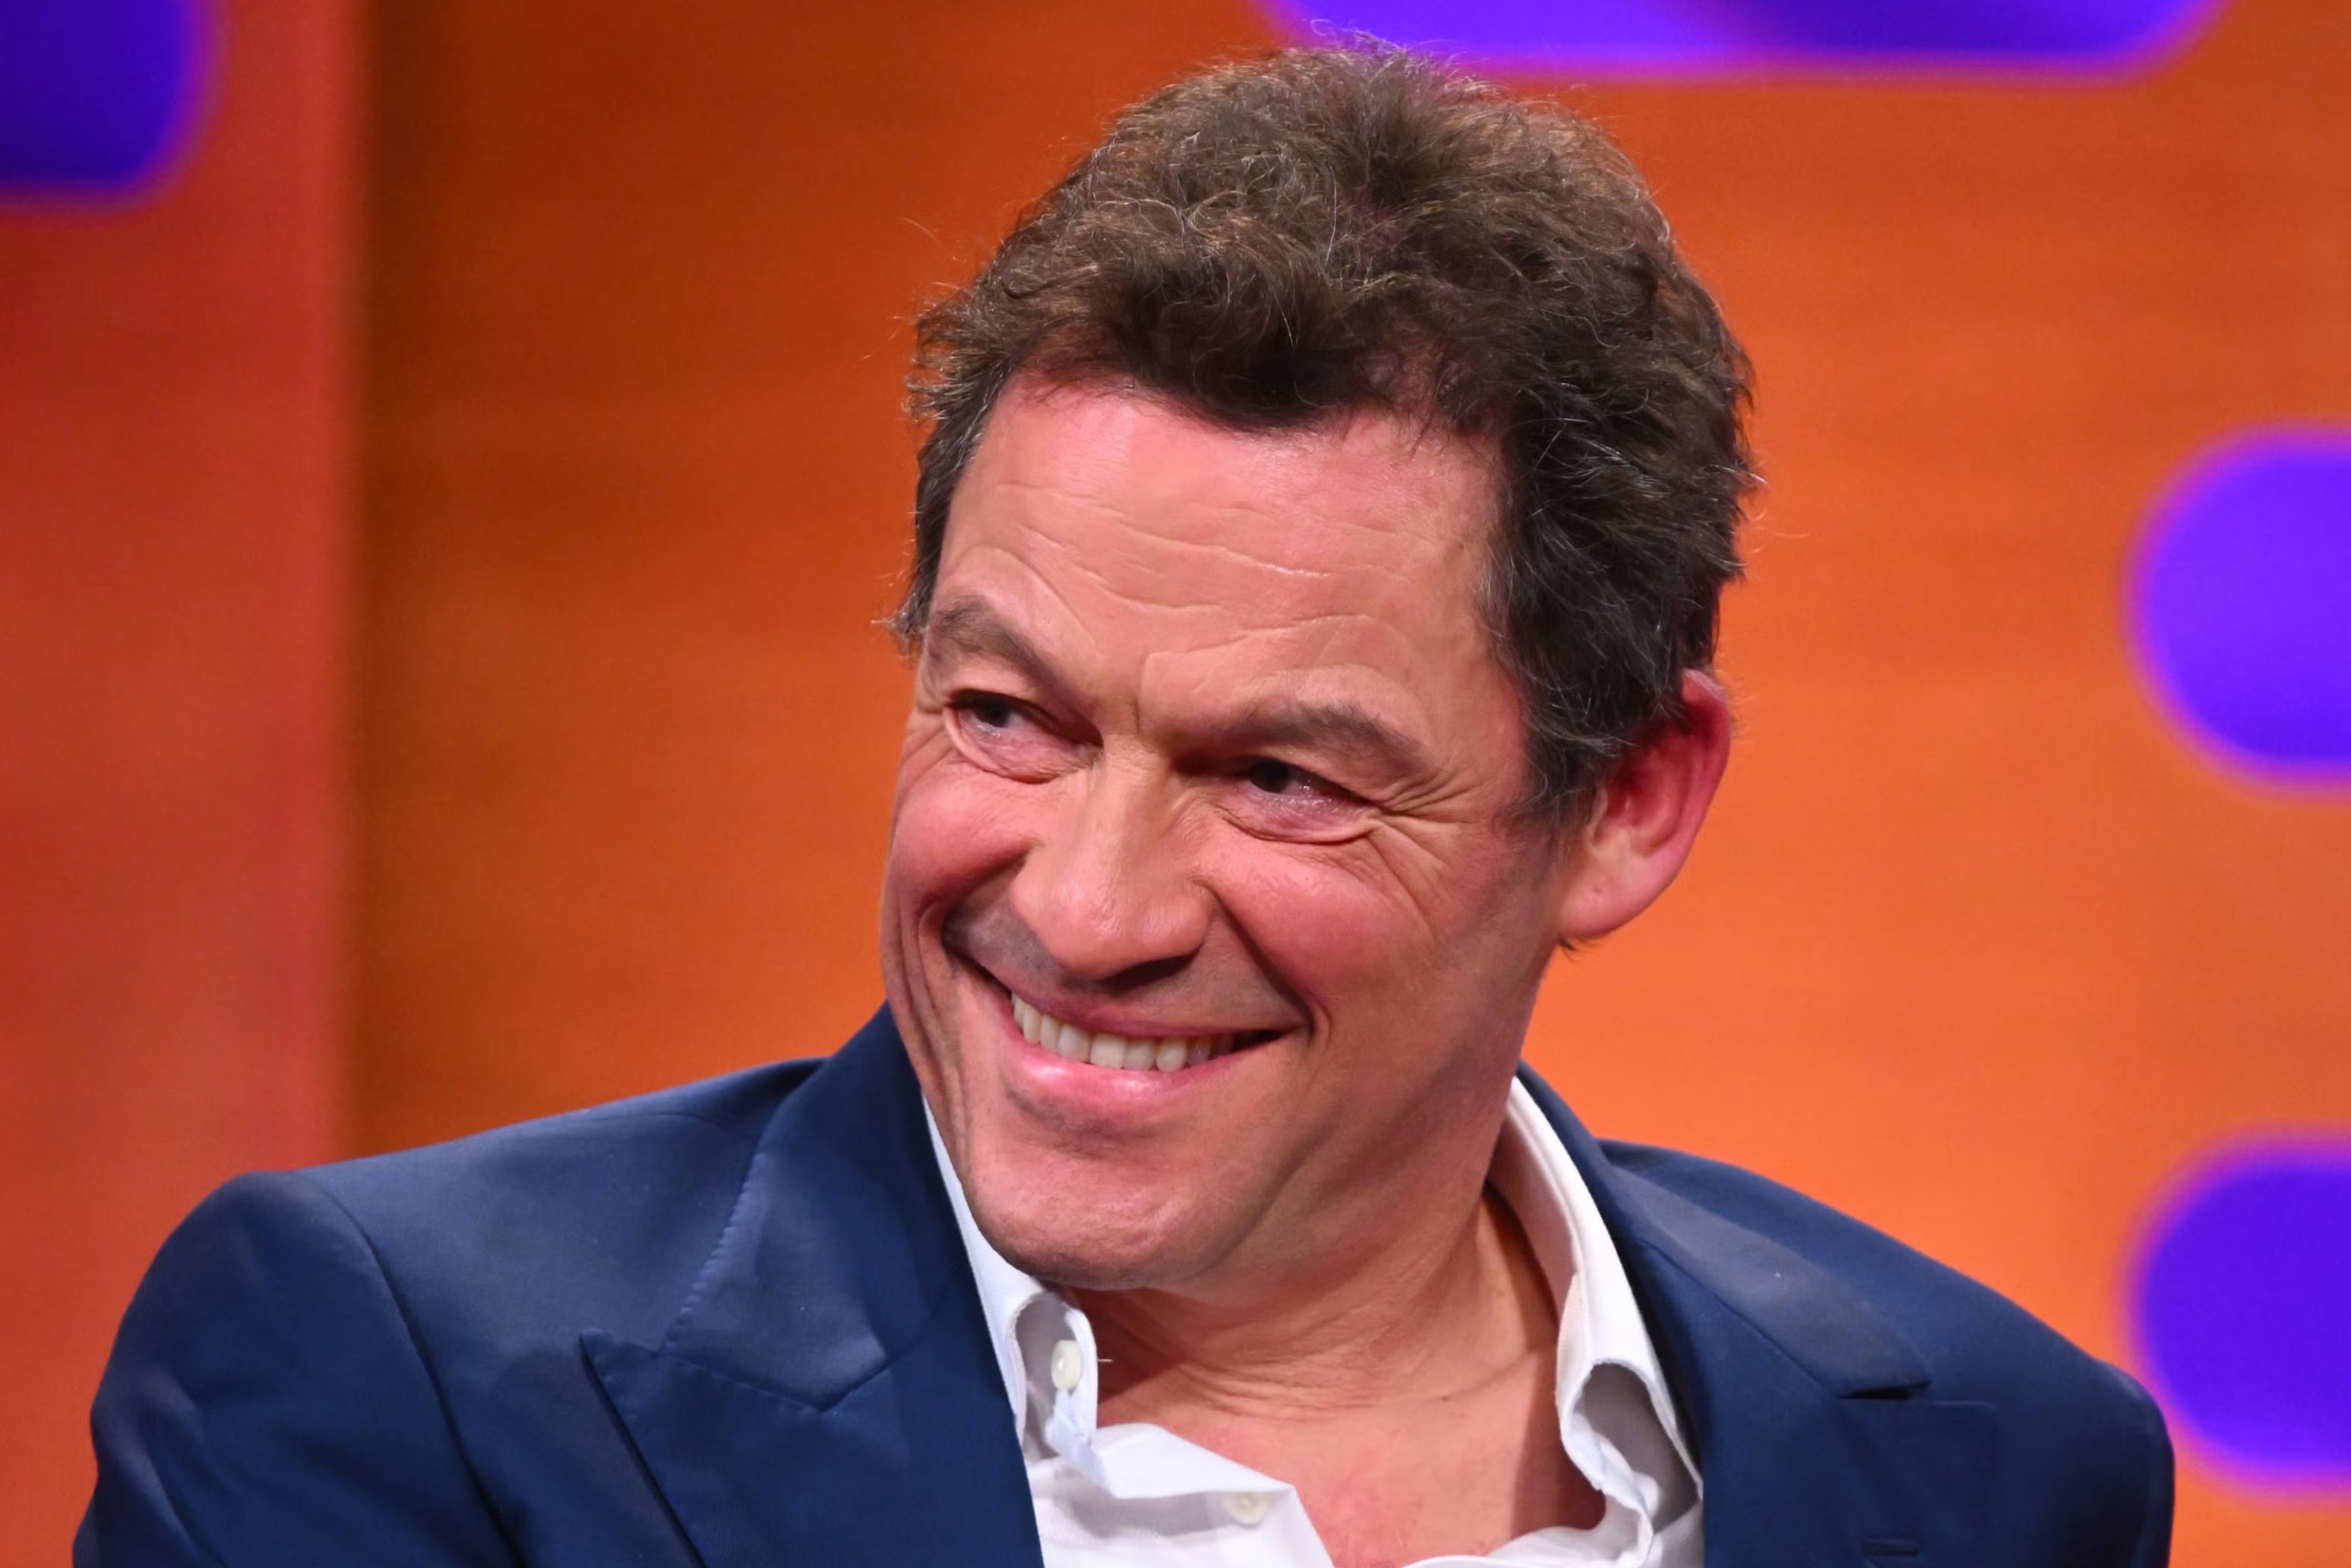 Dominic West recently spoke candidly about his reaction to negative reviews